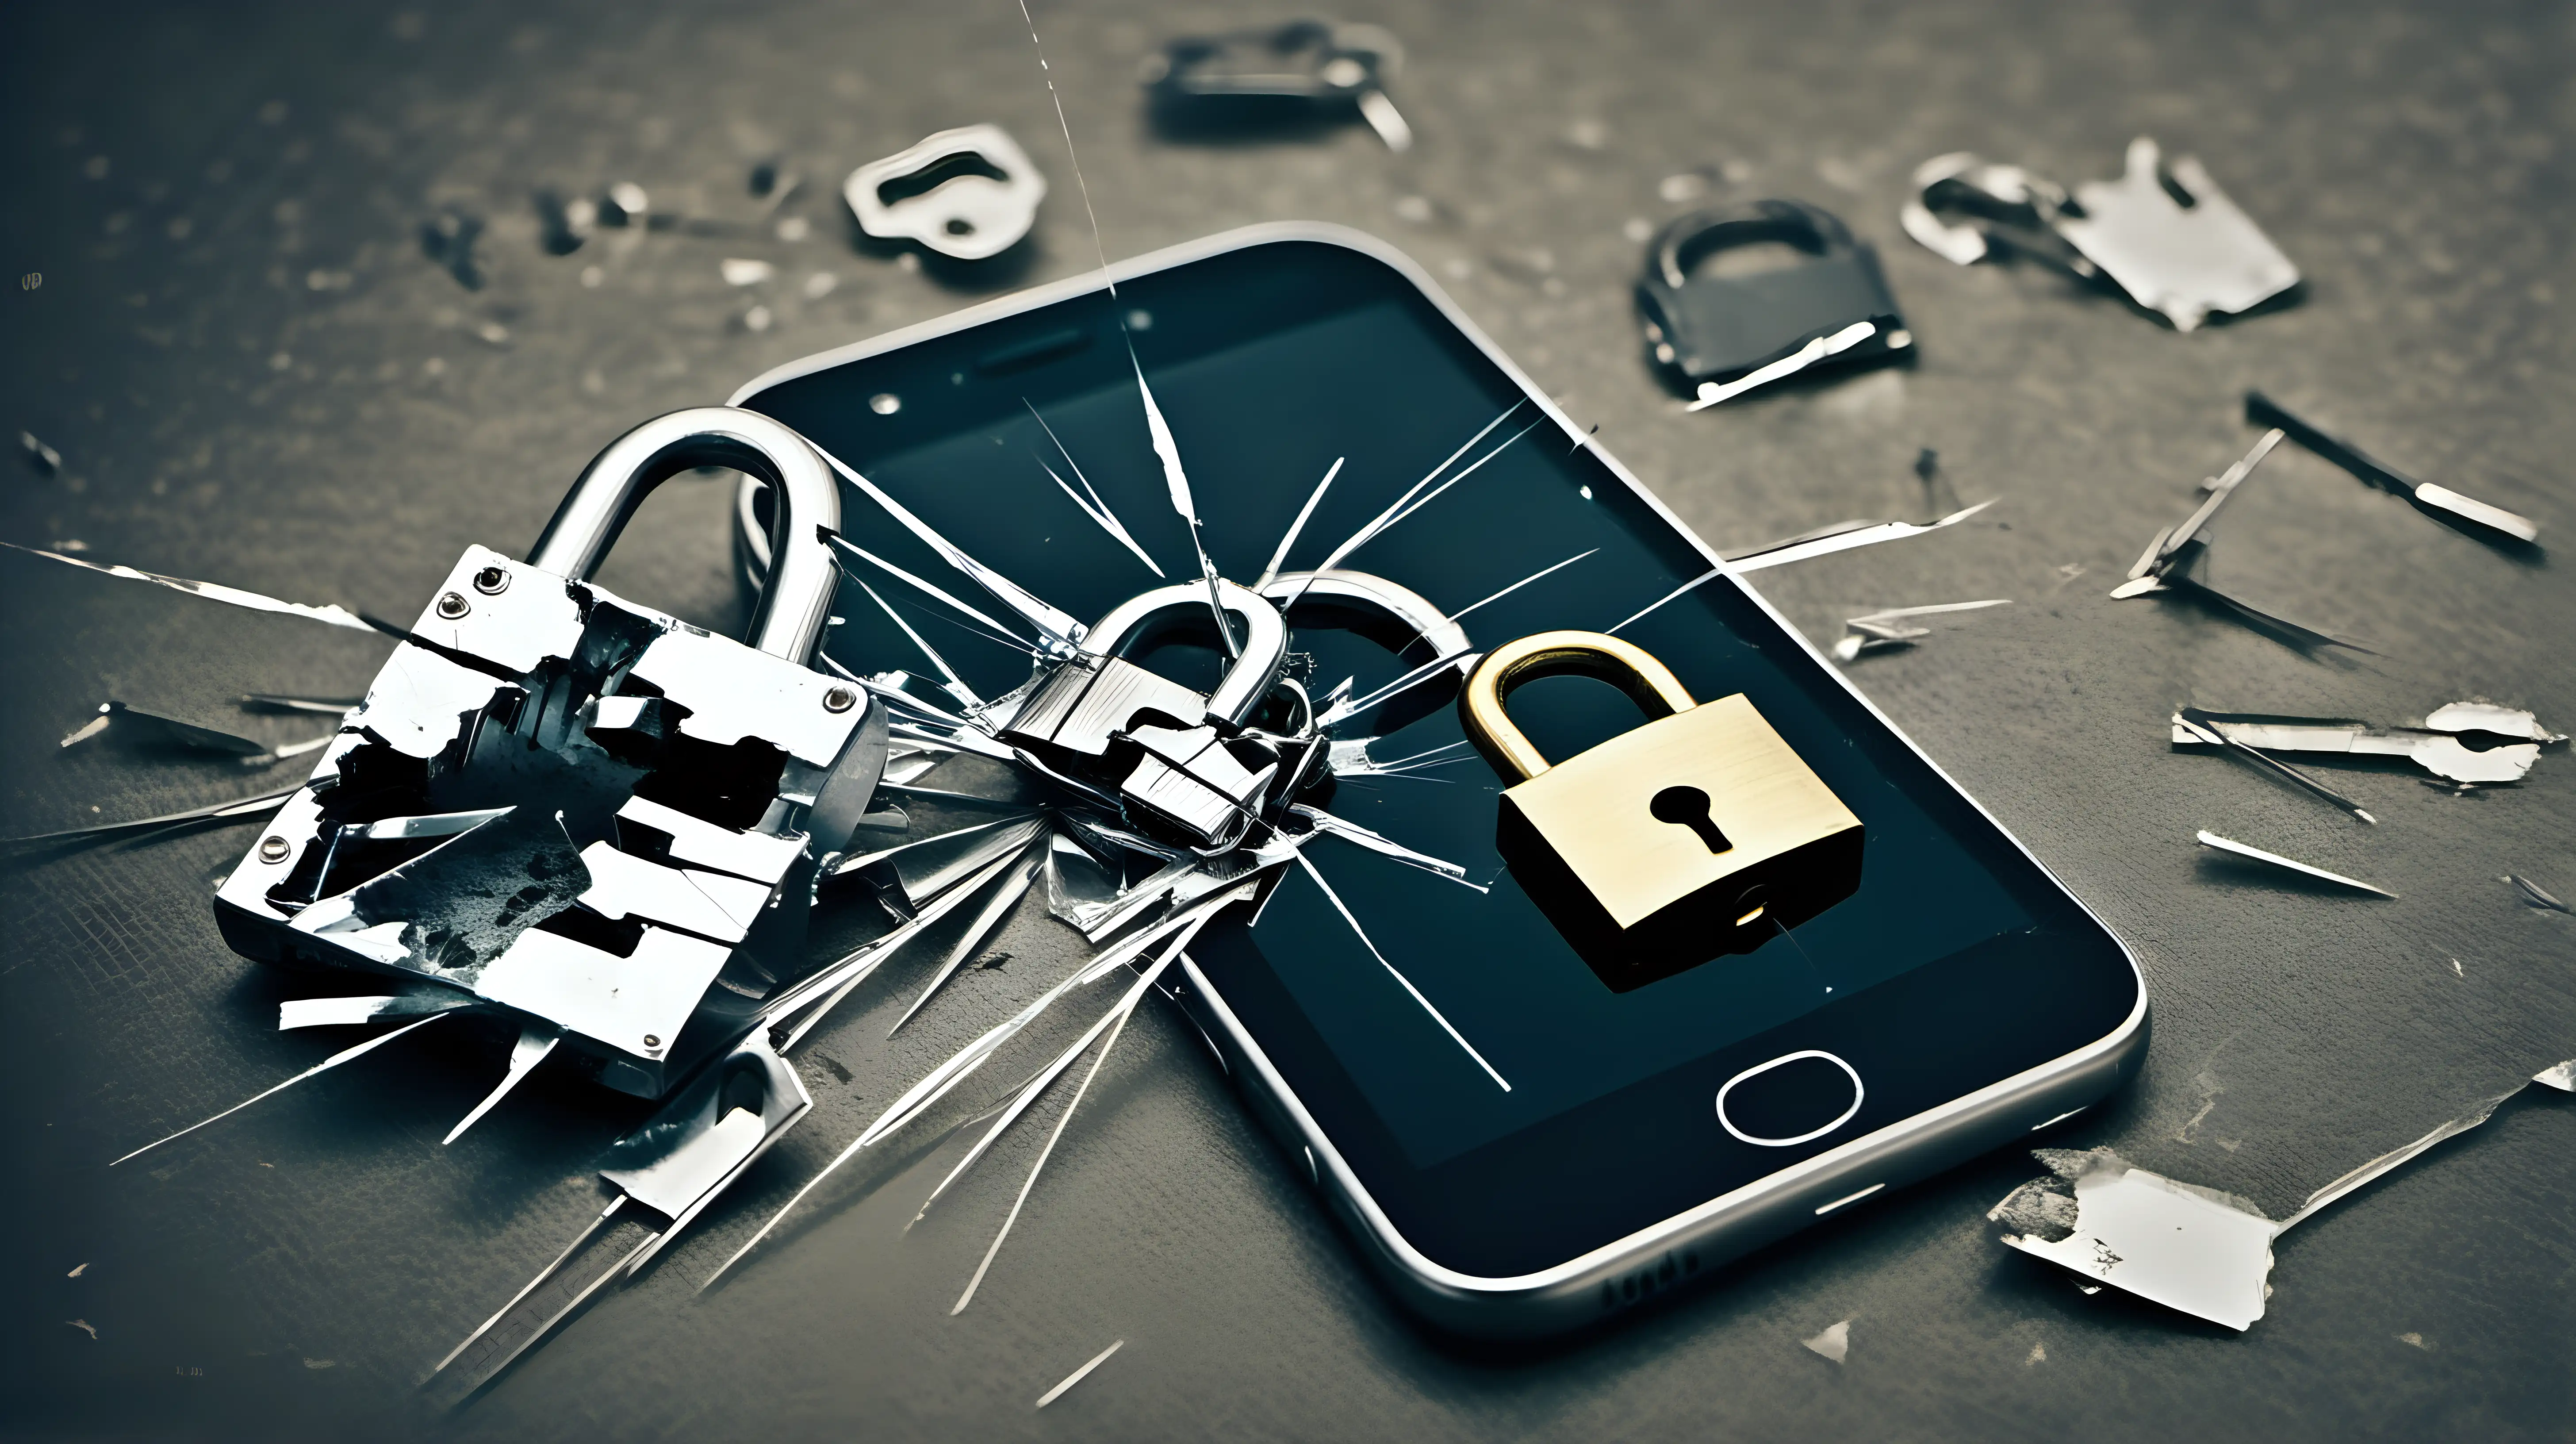 A broken padlock lying next to a shattered smartphone screen, symbolizing the vulnerability of digital devices to hacking attacks.